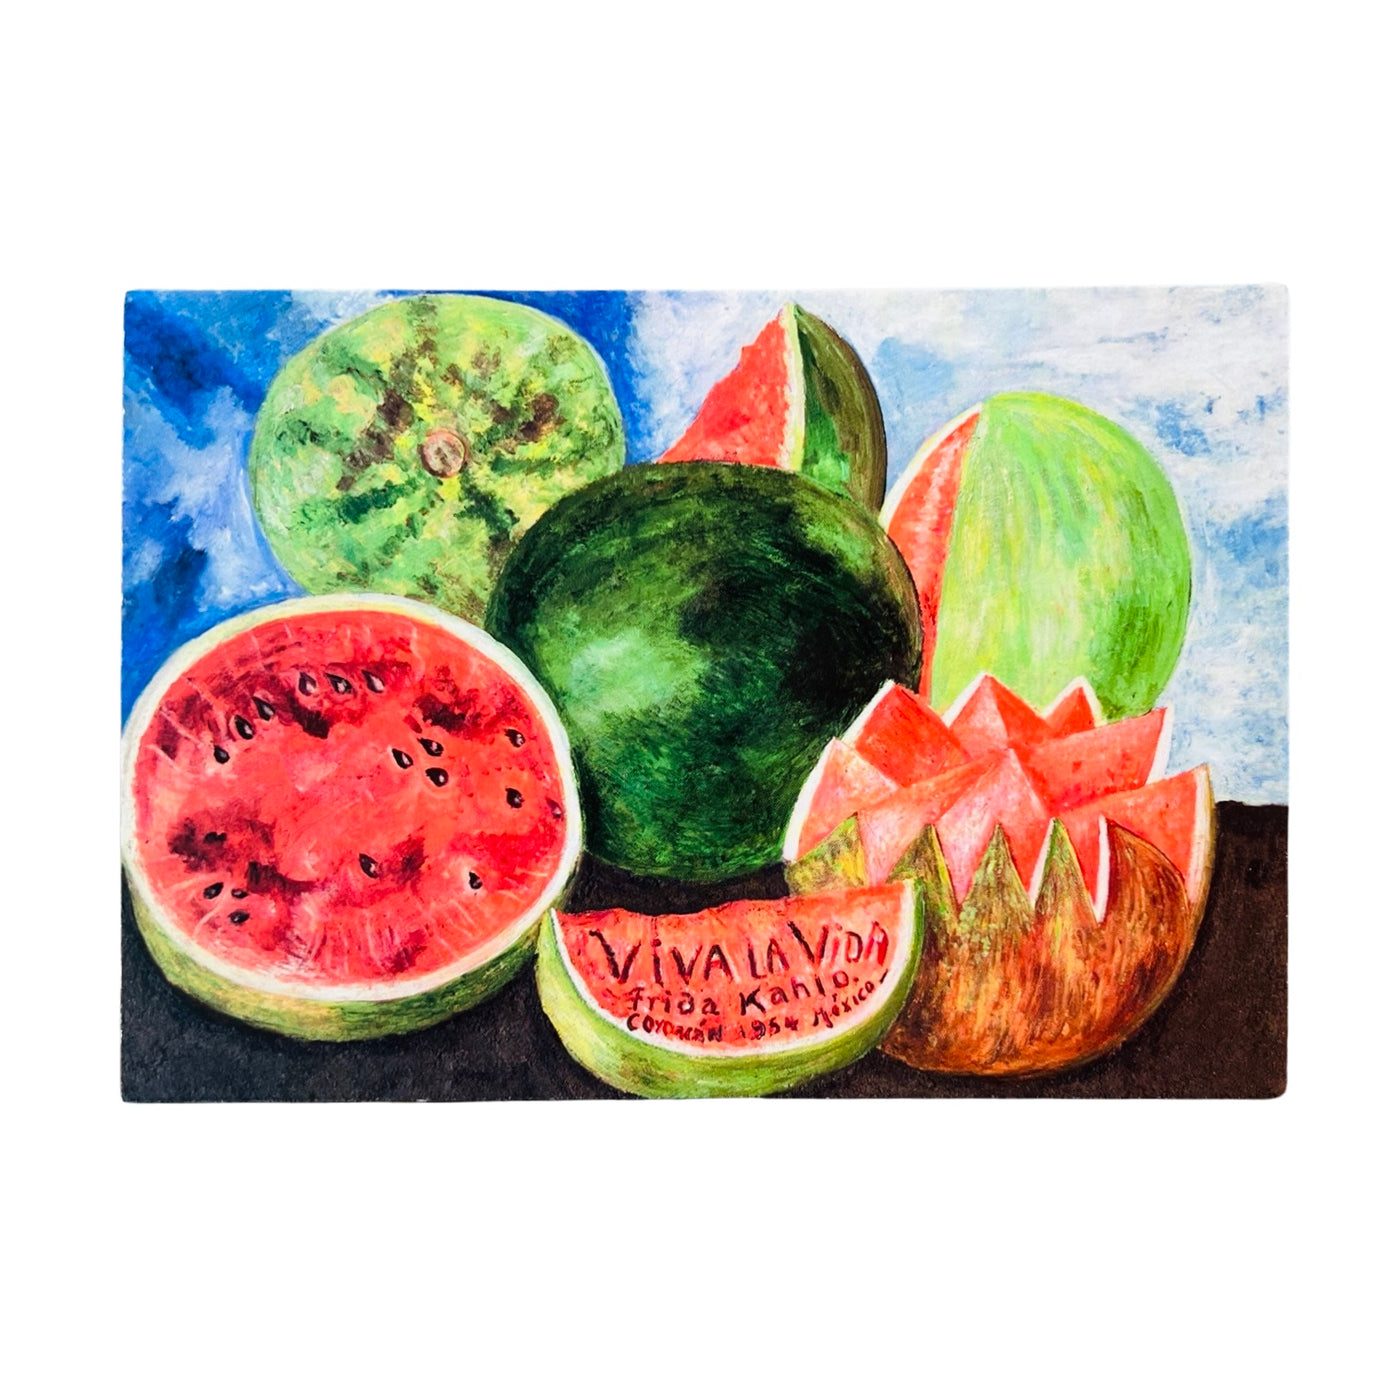 postcard with an image of watermelons with some cut in half and some are whole and uncut.